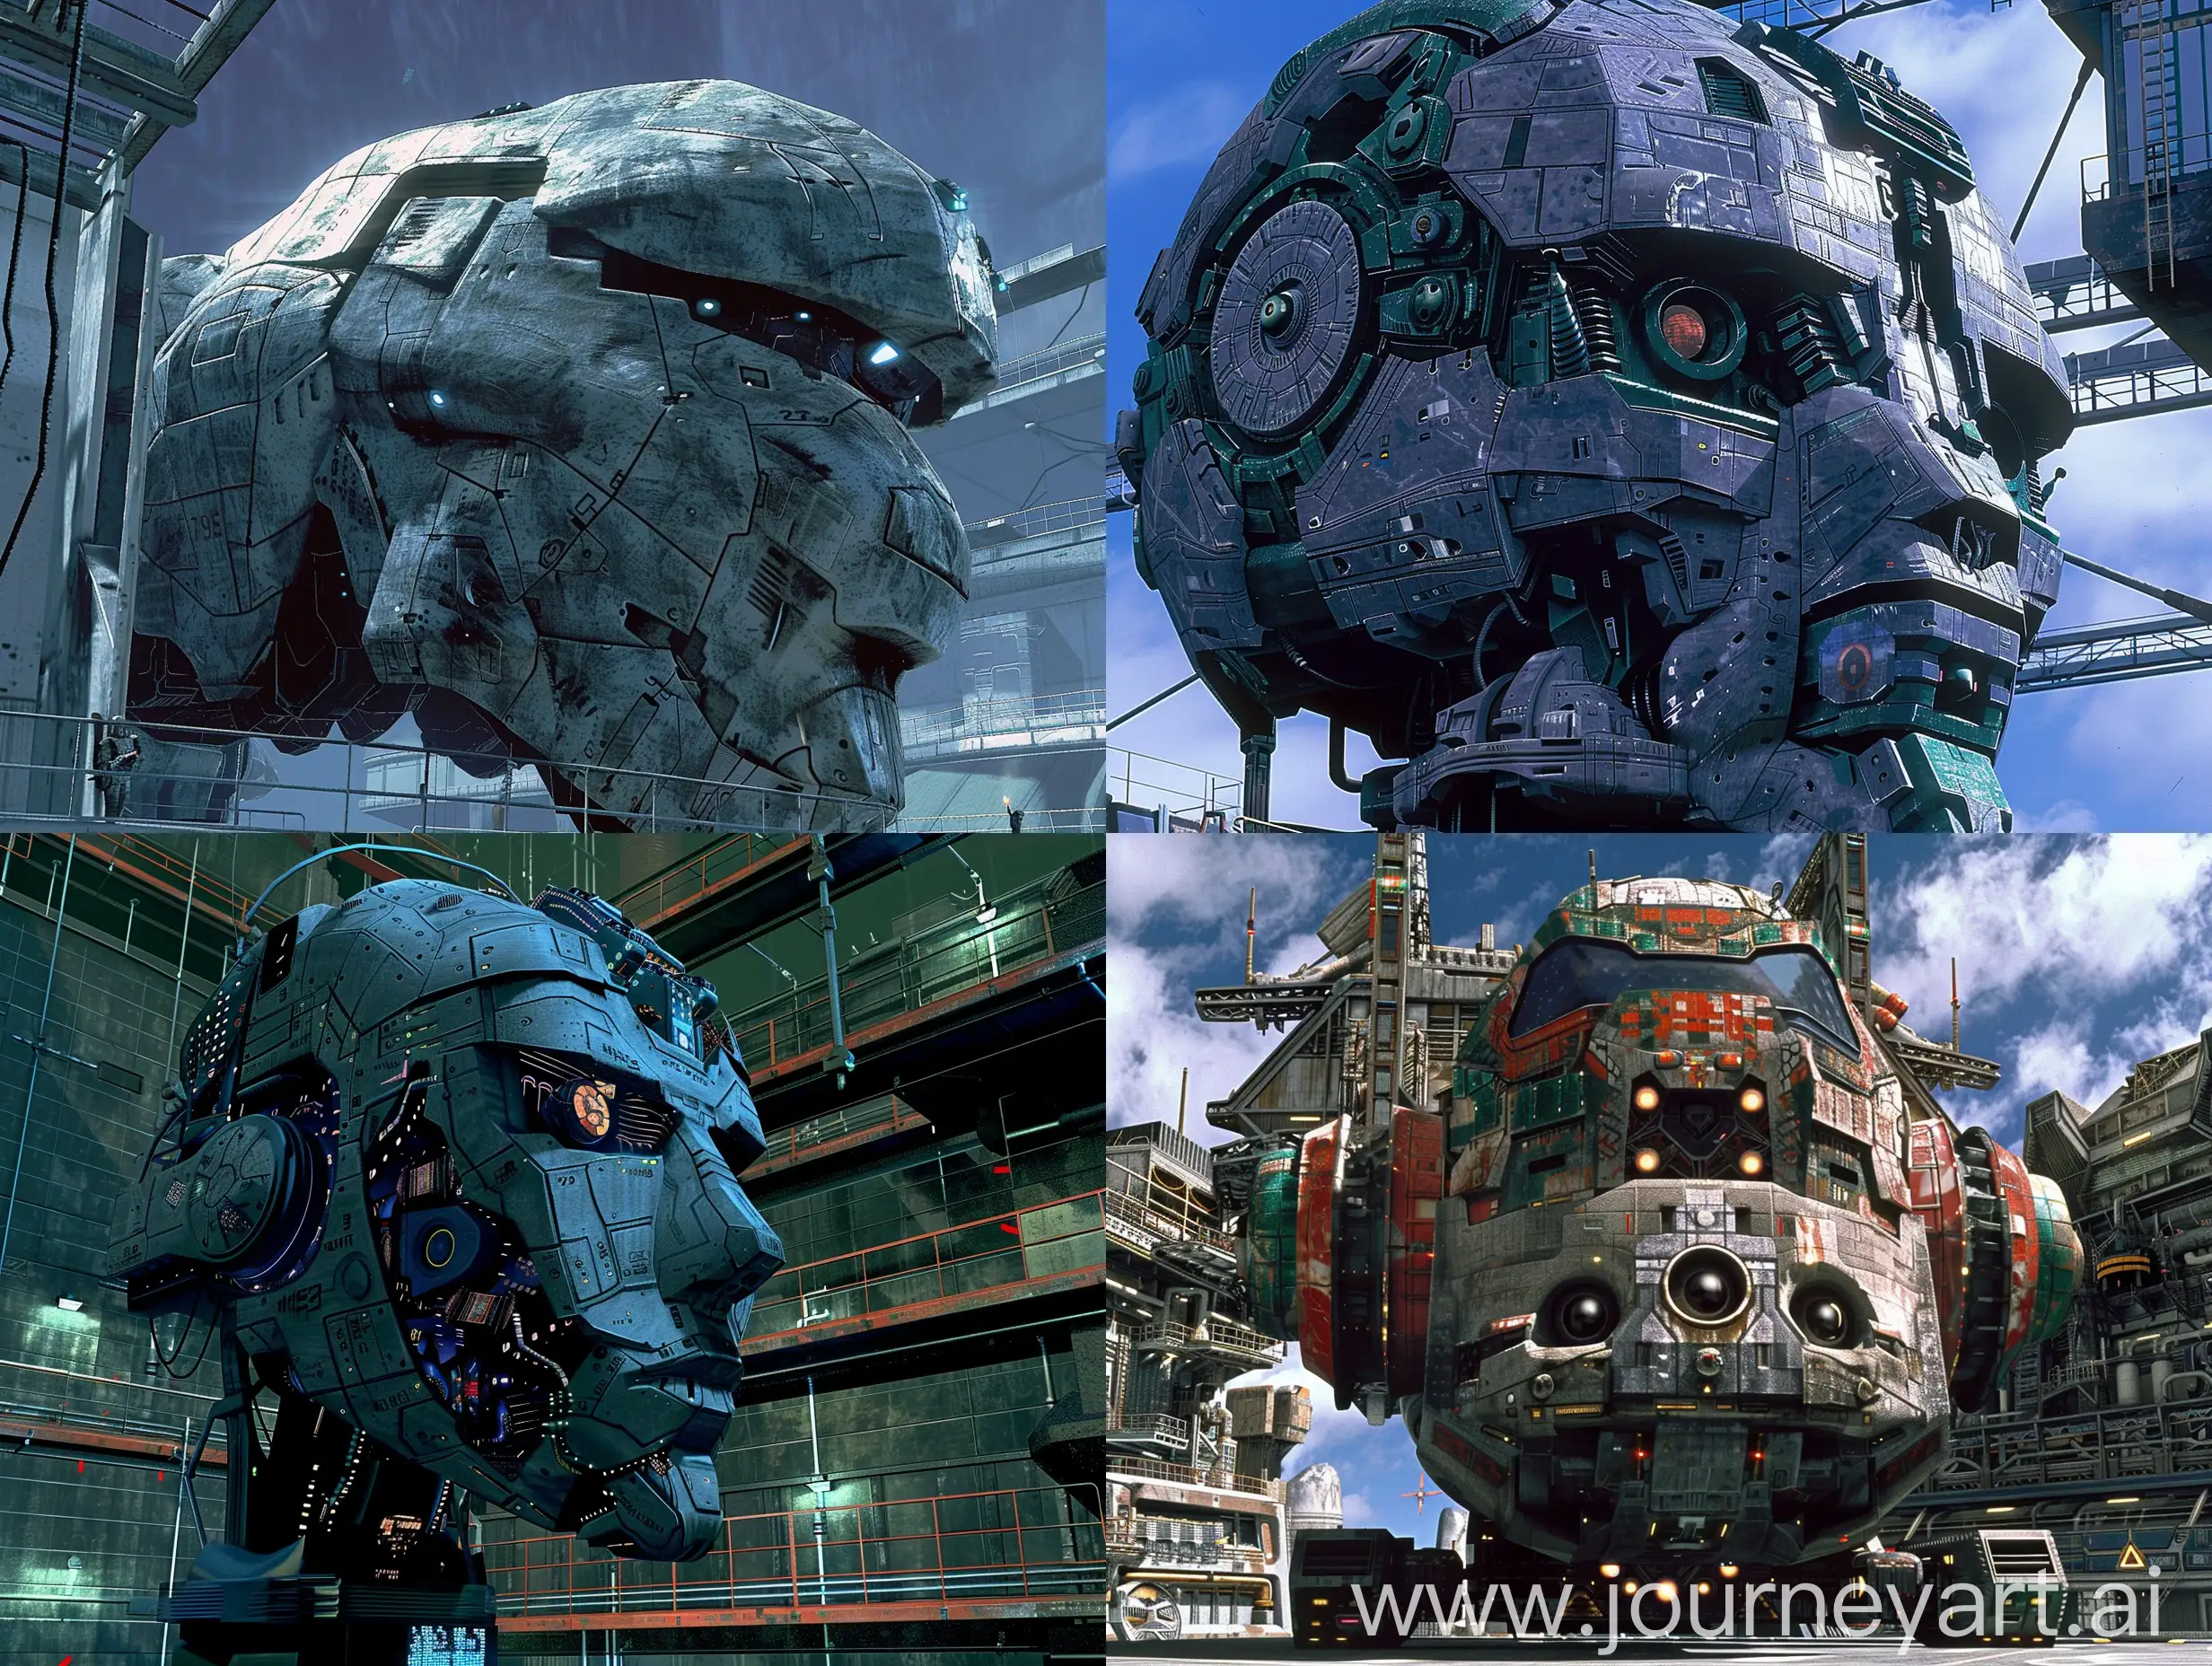 ps2 game graphics screengrab of a giant robot head, genre, retro, modern, futurism, y2k aesthetic, nostalgic trend, environment, playstation 2 graphics,
